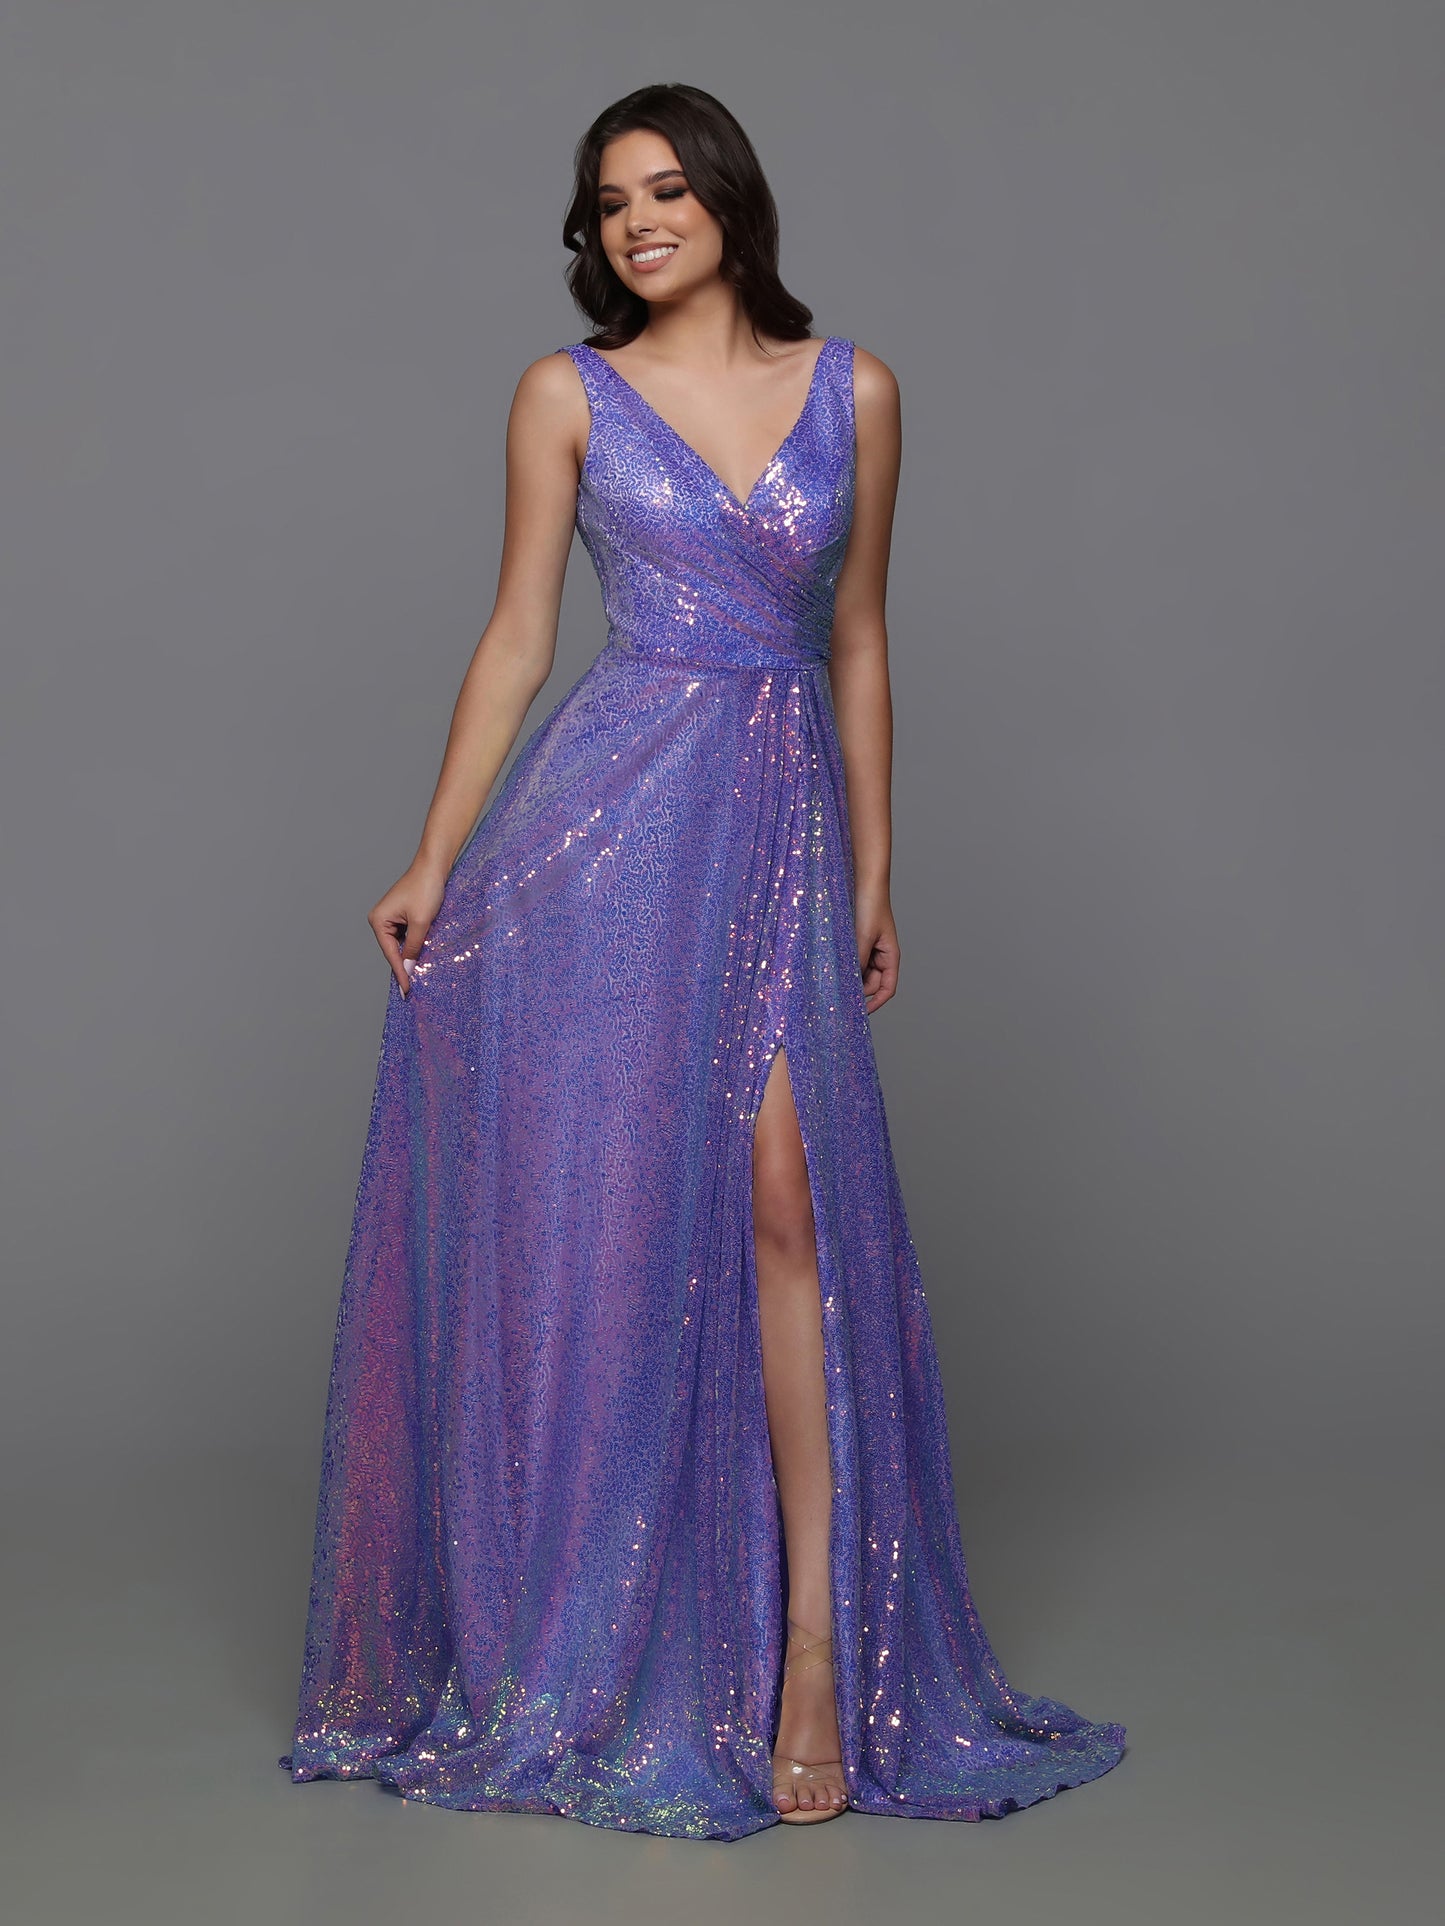 Sparkle Prom 72229 Long Sequin A Line Prom Dress Slit Ruched Skirt Formal Gown Iridescent  Sizes: 0-20  Colors: Cobalt, Gold/Black, Lilac